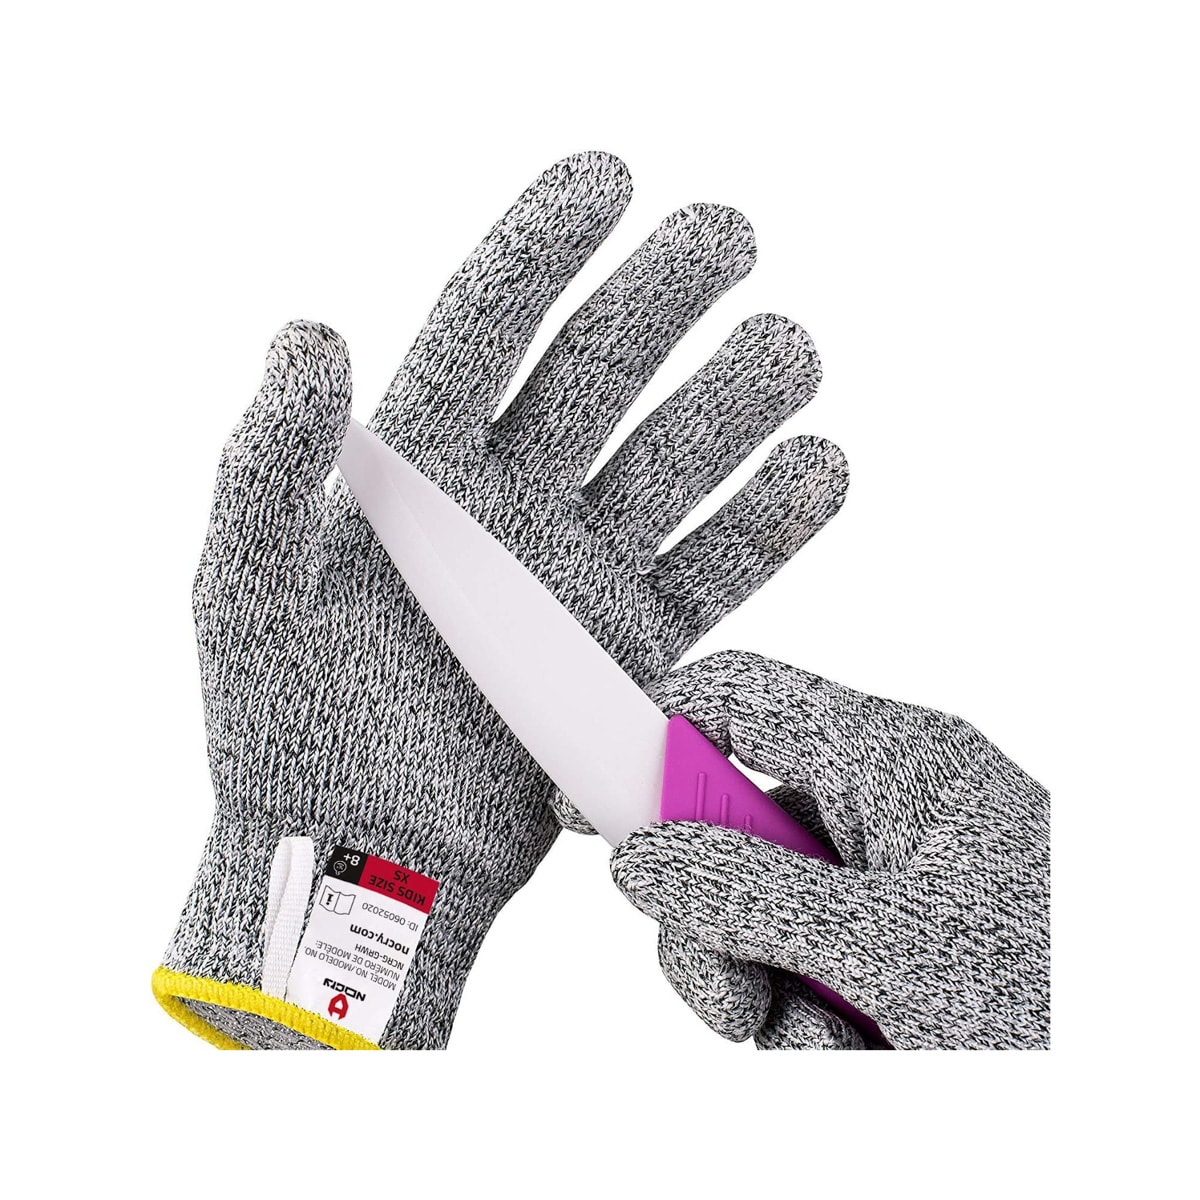 Protective gray gloves with a knife blade touching one to demonstrate that the knife can't cut through the glove.